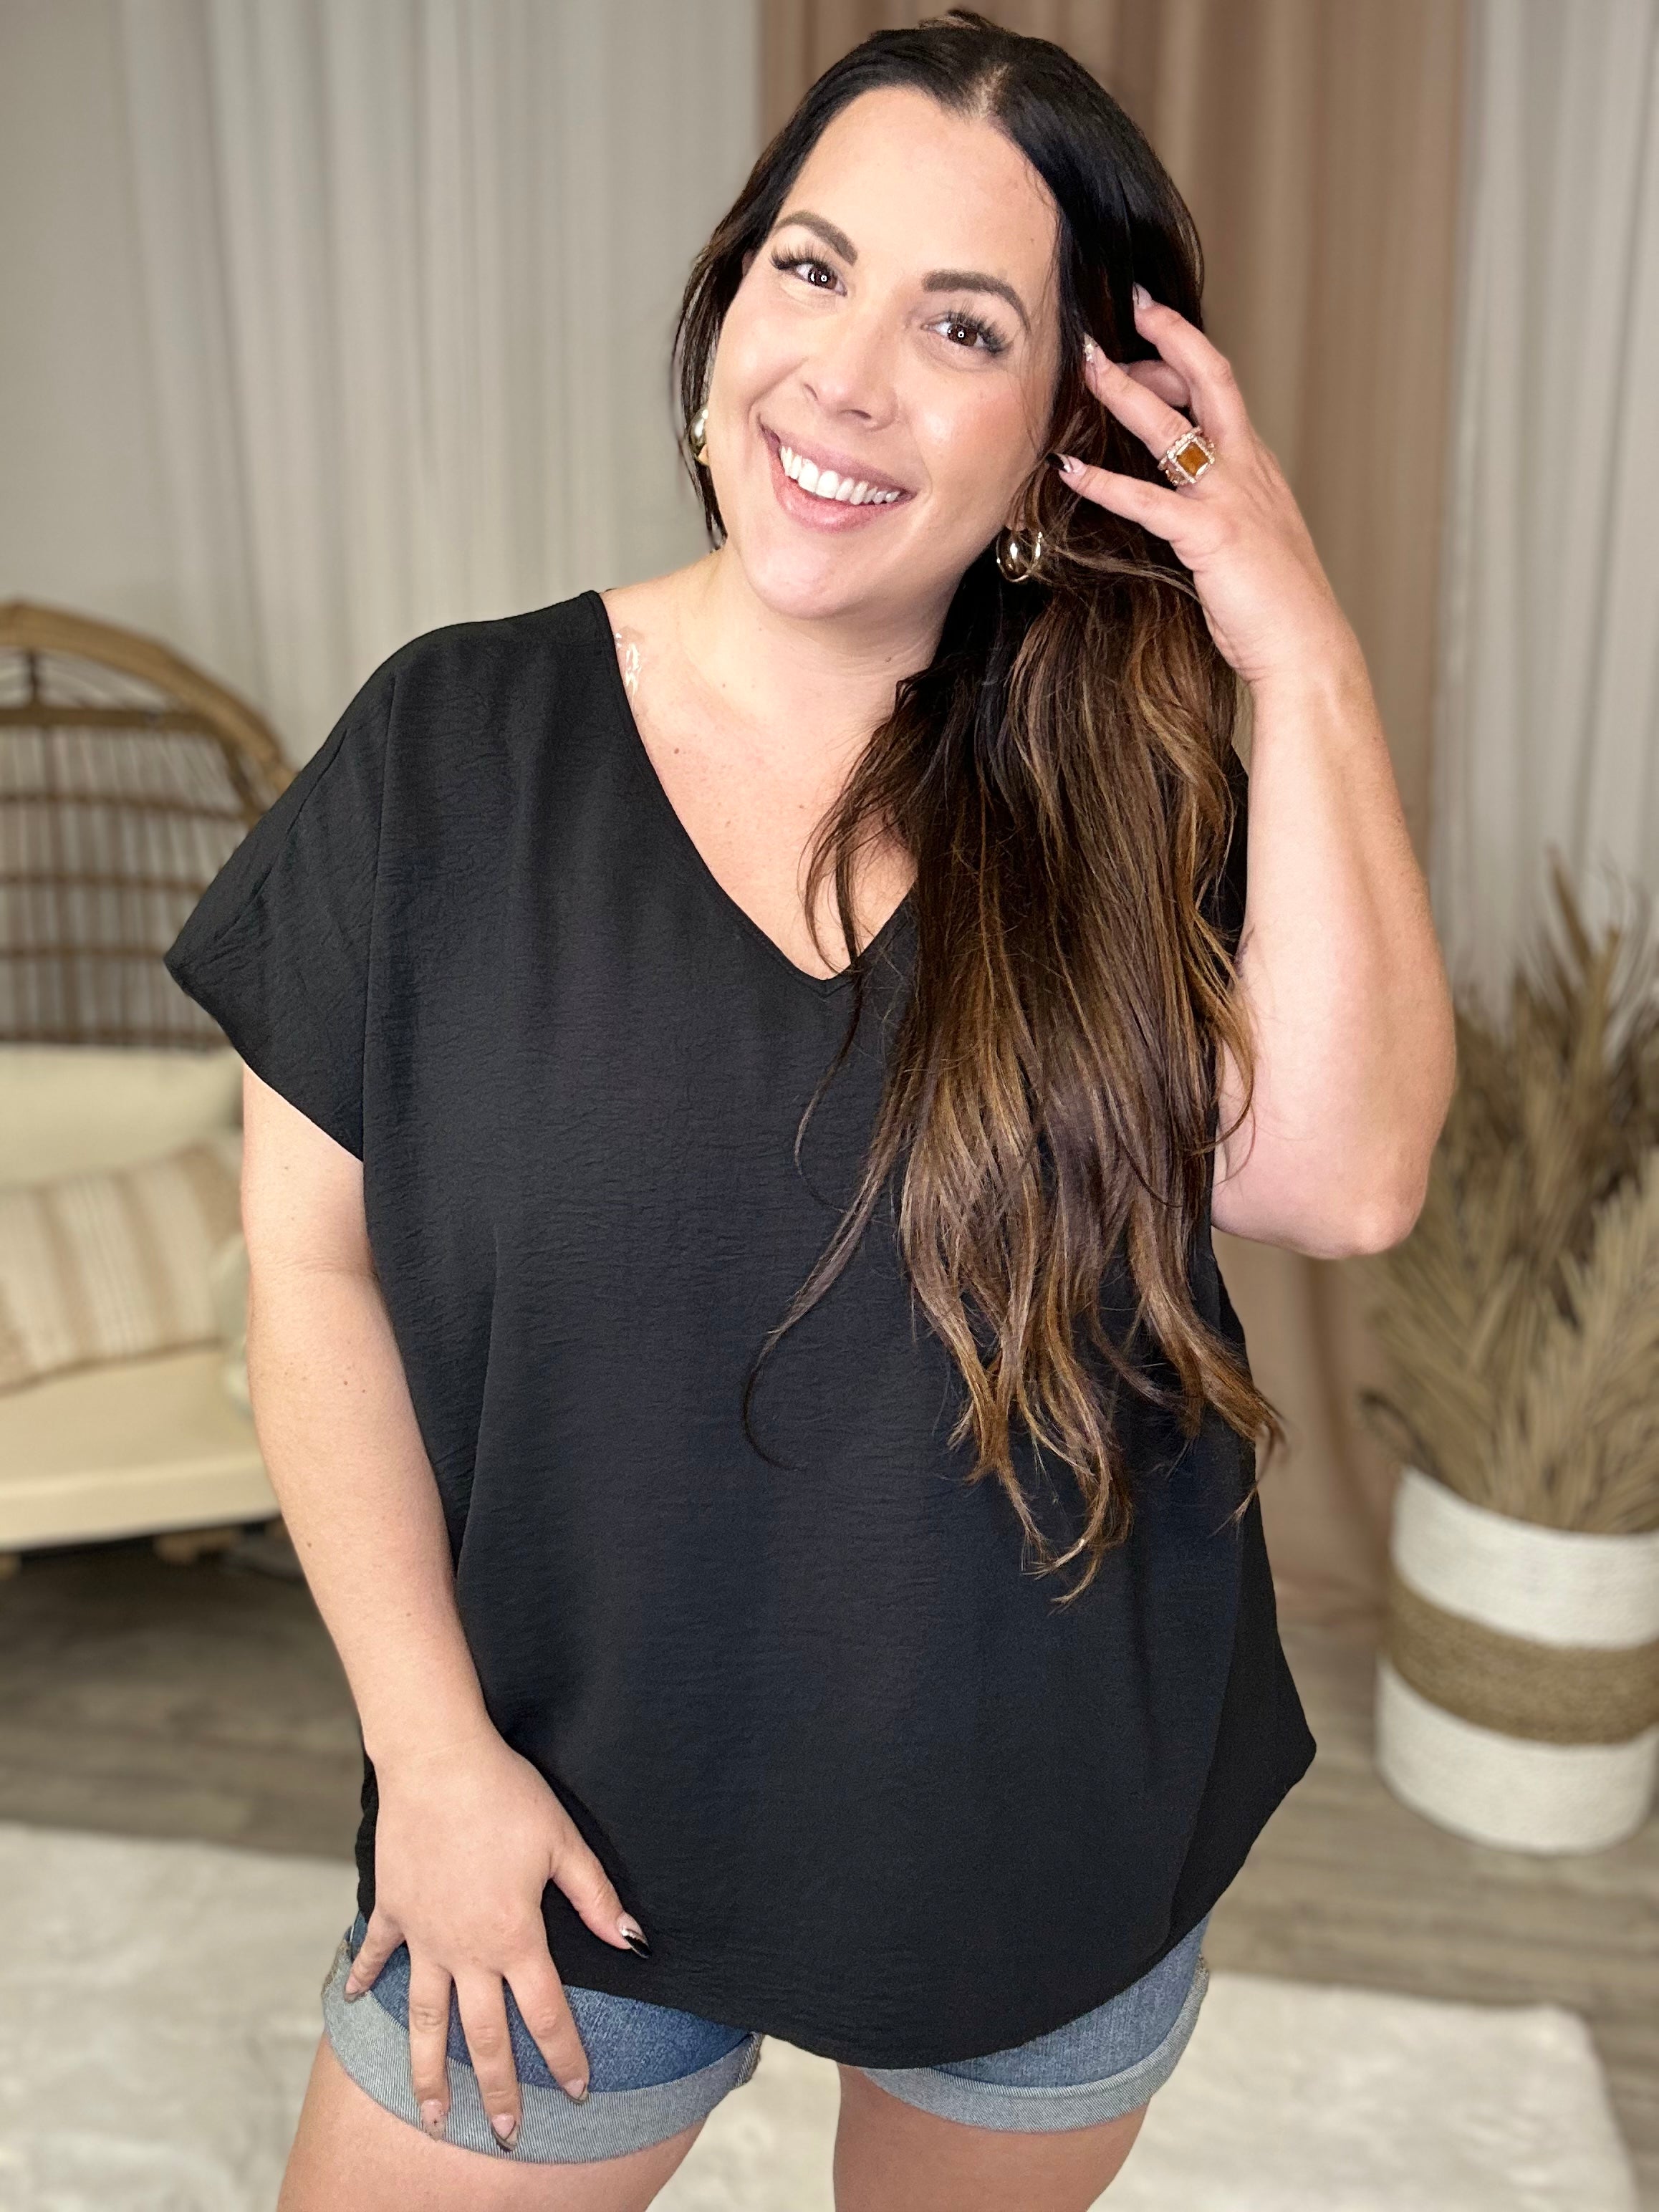 RESTOCK: Boxed Out Top-110 Short Sleeve Top-Sew In Love-Heathered Boho Boutique, Women's Fashion and Accessories in Palmetto, FL